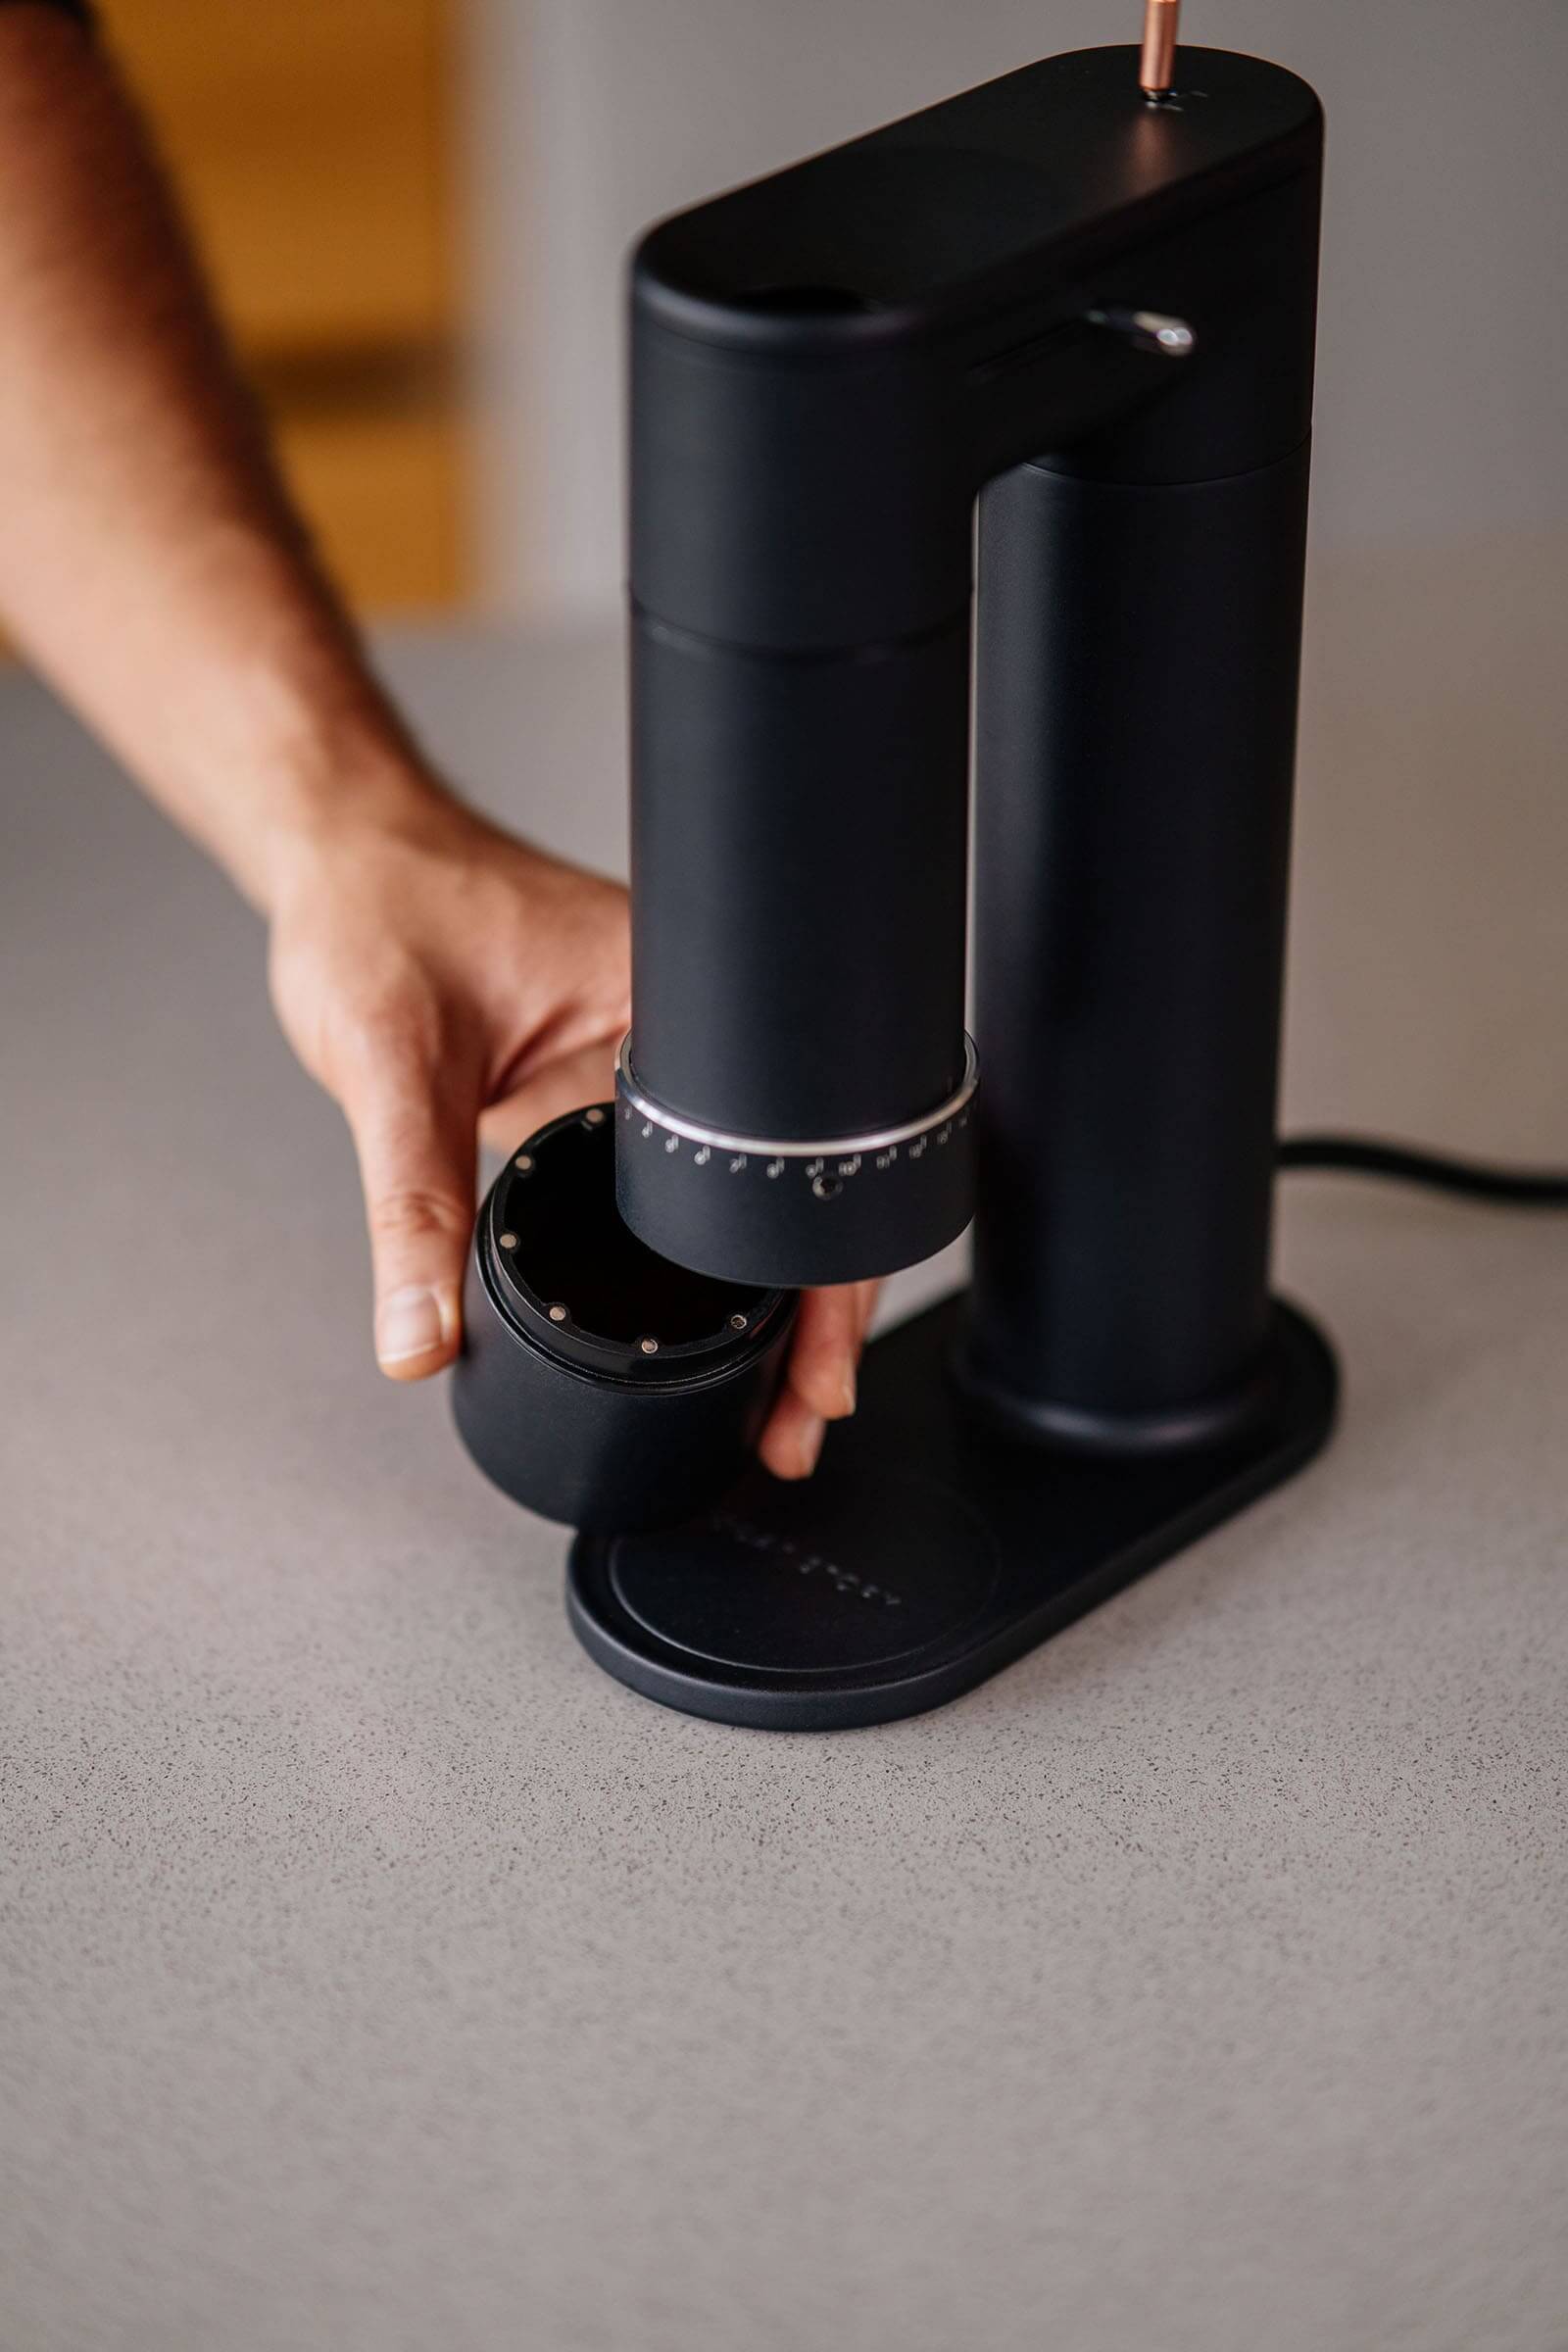 ARCO【週末値下げ】ARCO 2-in-1 Coffee Grinder 